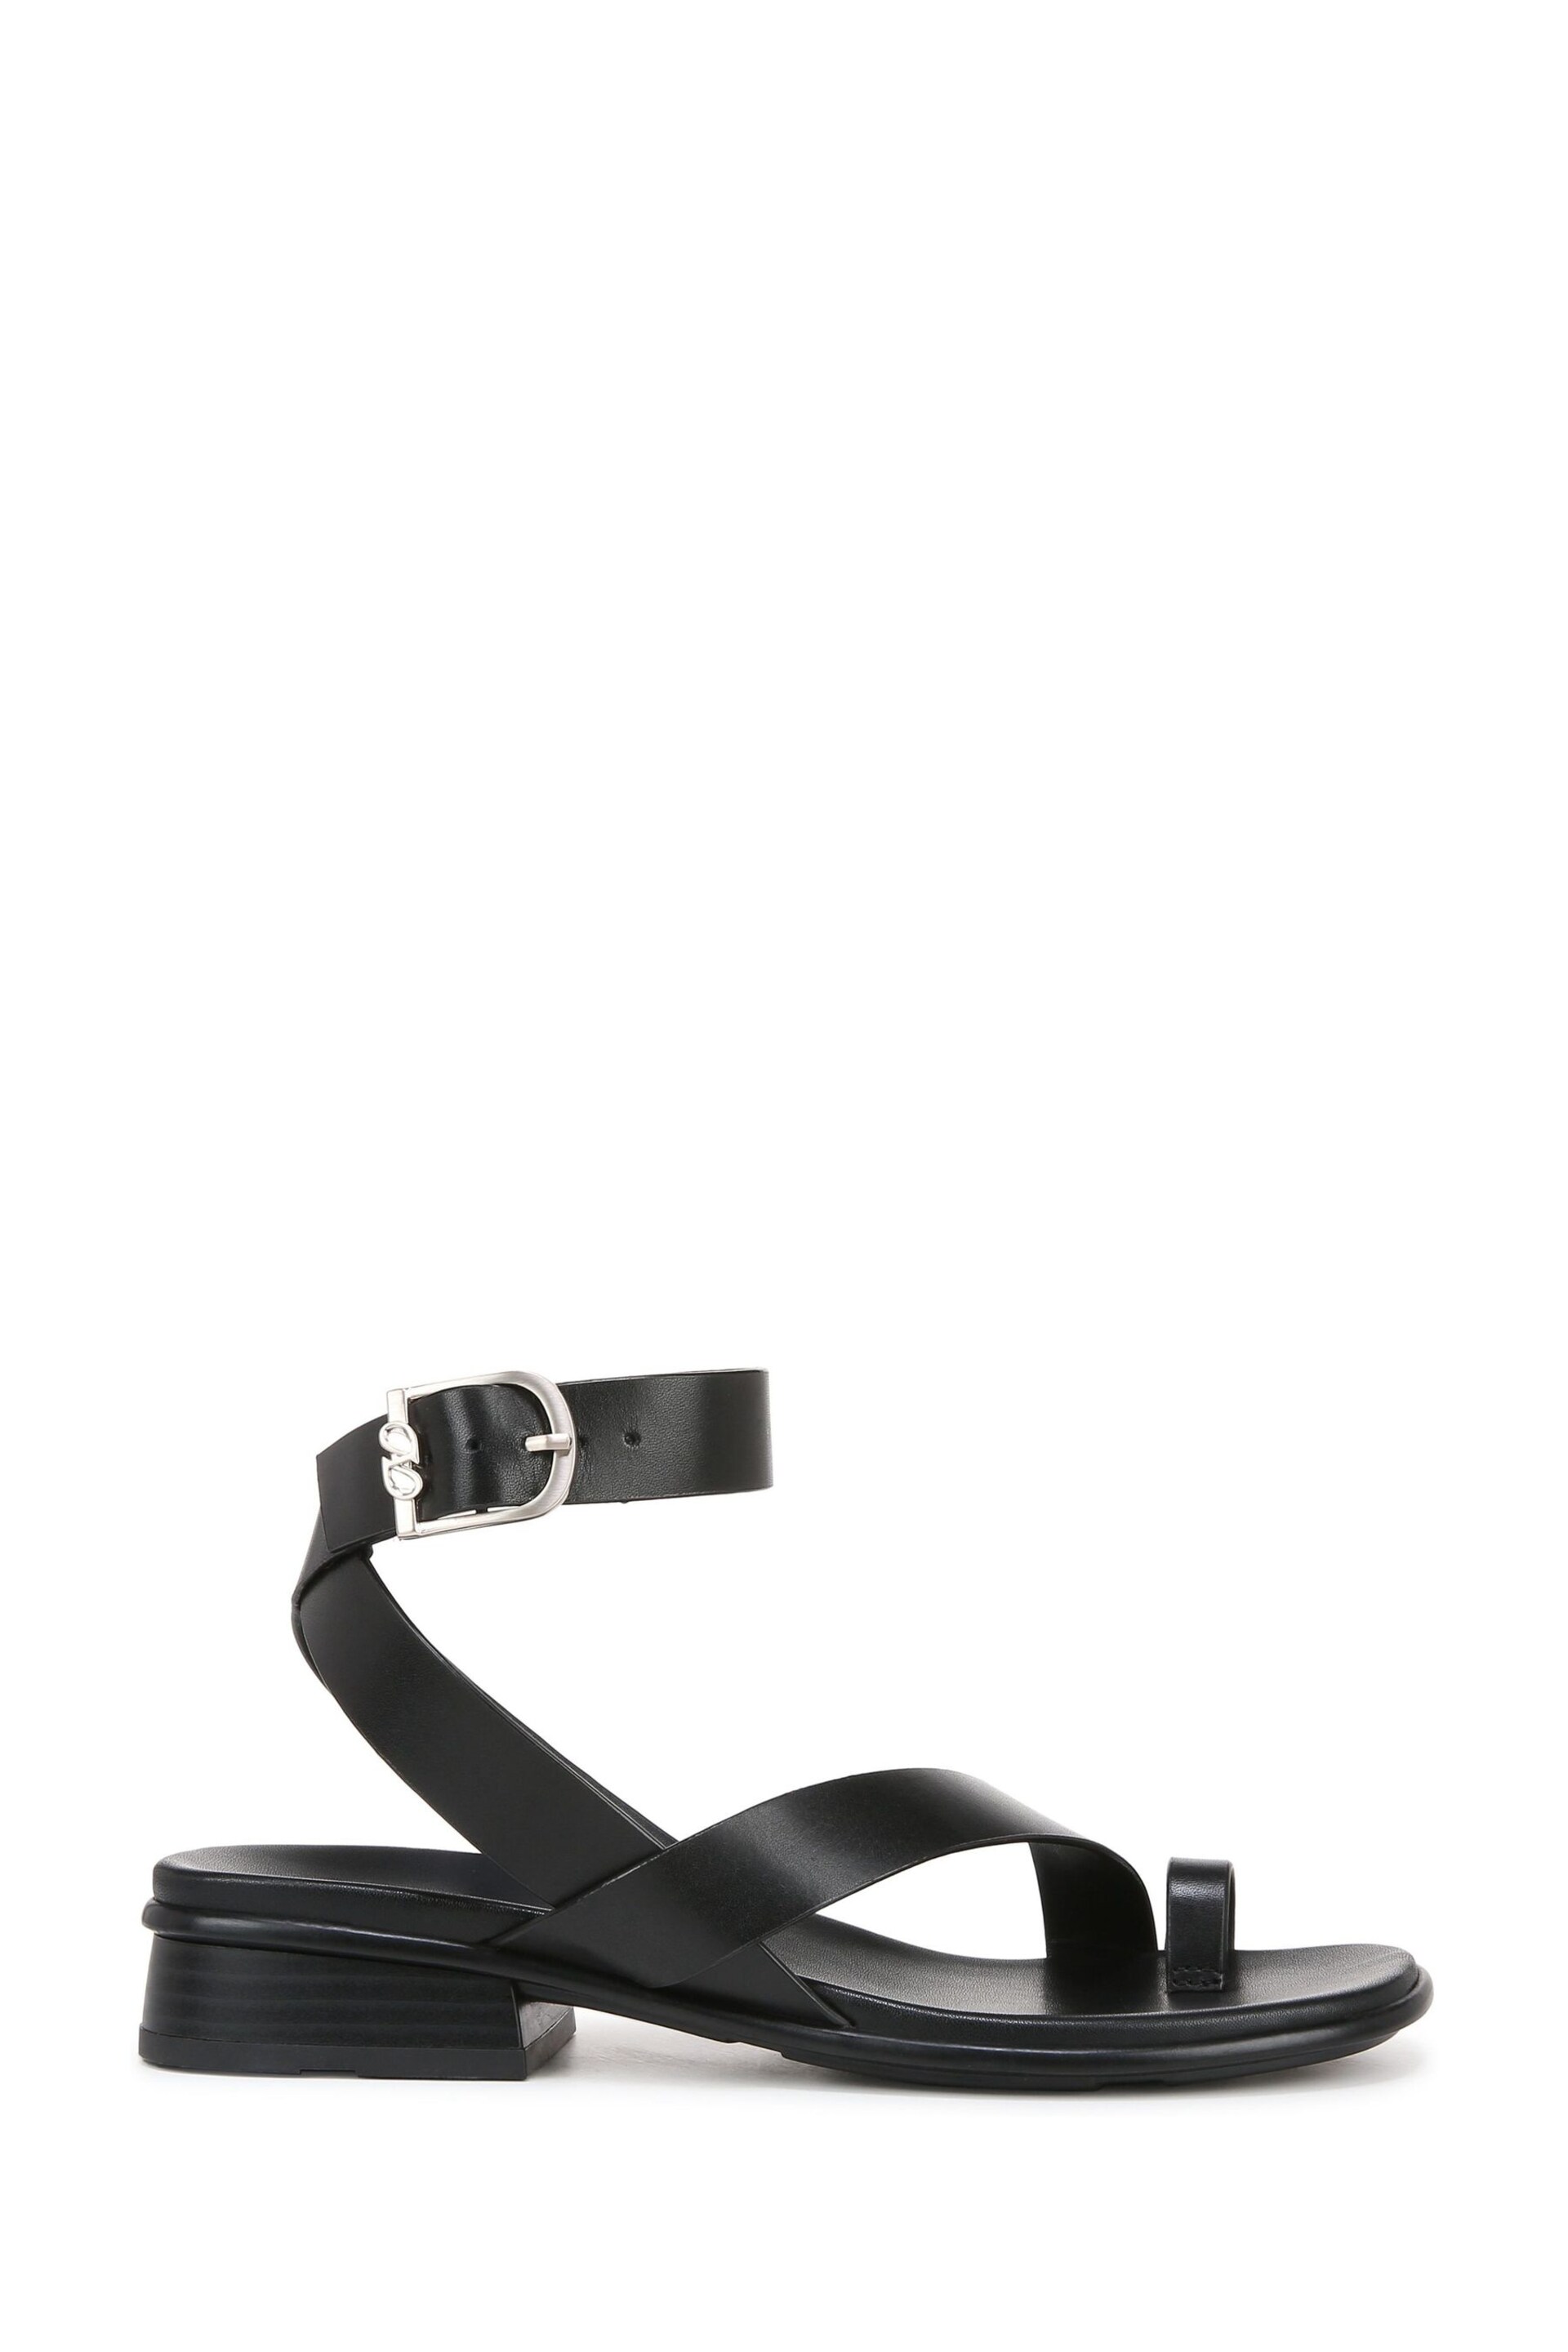 Naturalizer Birch Ankle Strap Sandals - Image 1 of 7